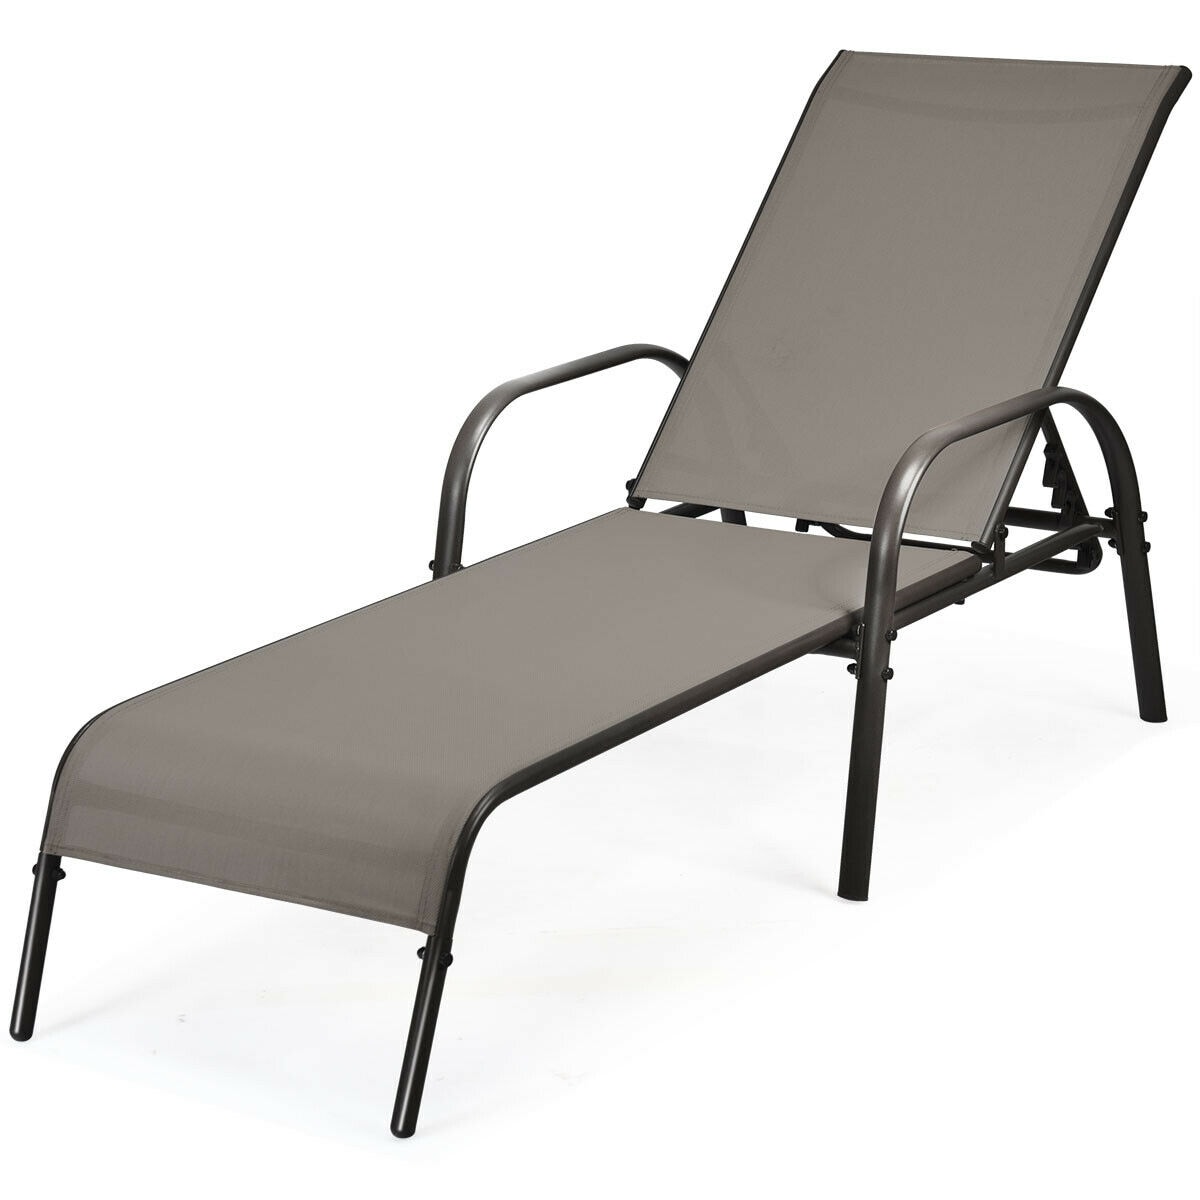 Clihome Outdoor Lounge Chair Black Metal Frame Stationary Chaise Lounge  Chair(S) With Brown Sling Seat In The Patio Chairs Department At Lowes.Com